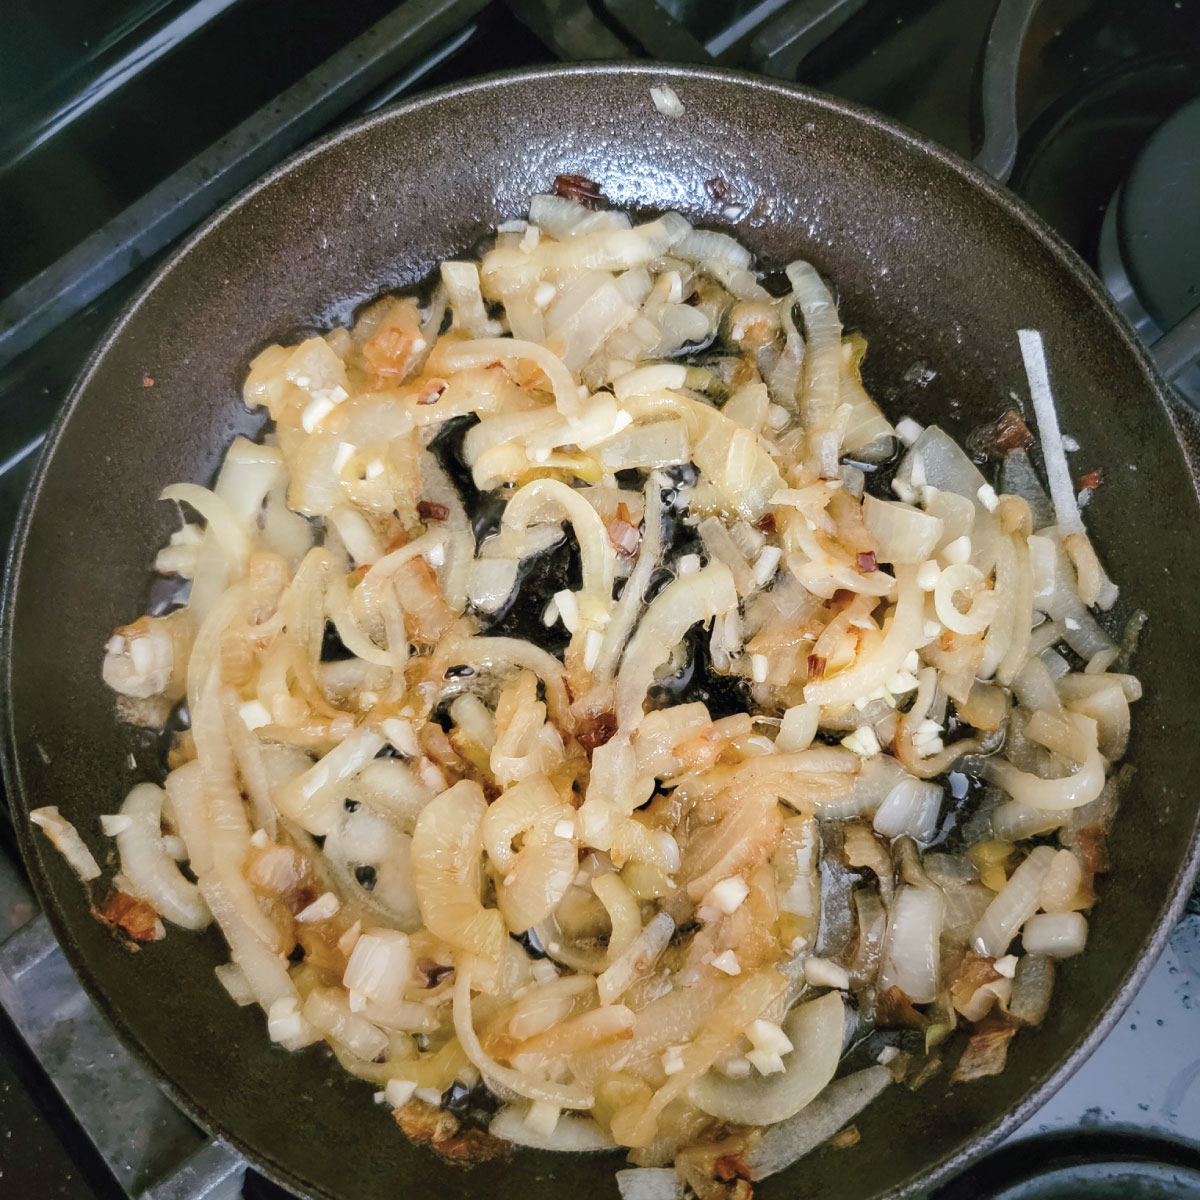 Onions and garlic frying in a pan with butter and oil, the onions are slightly browning